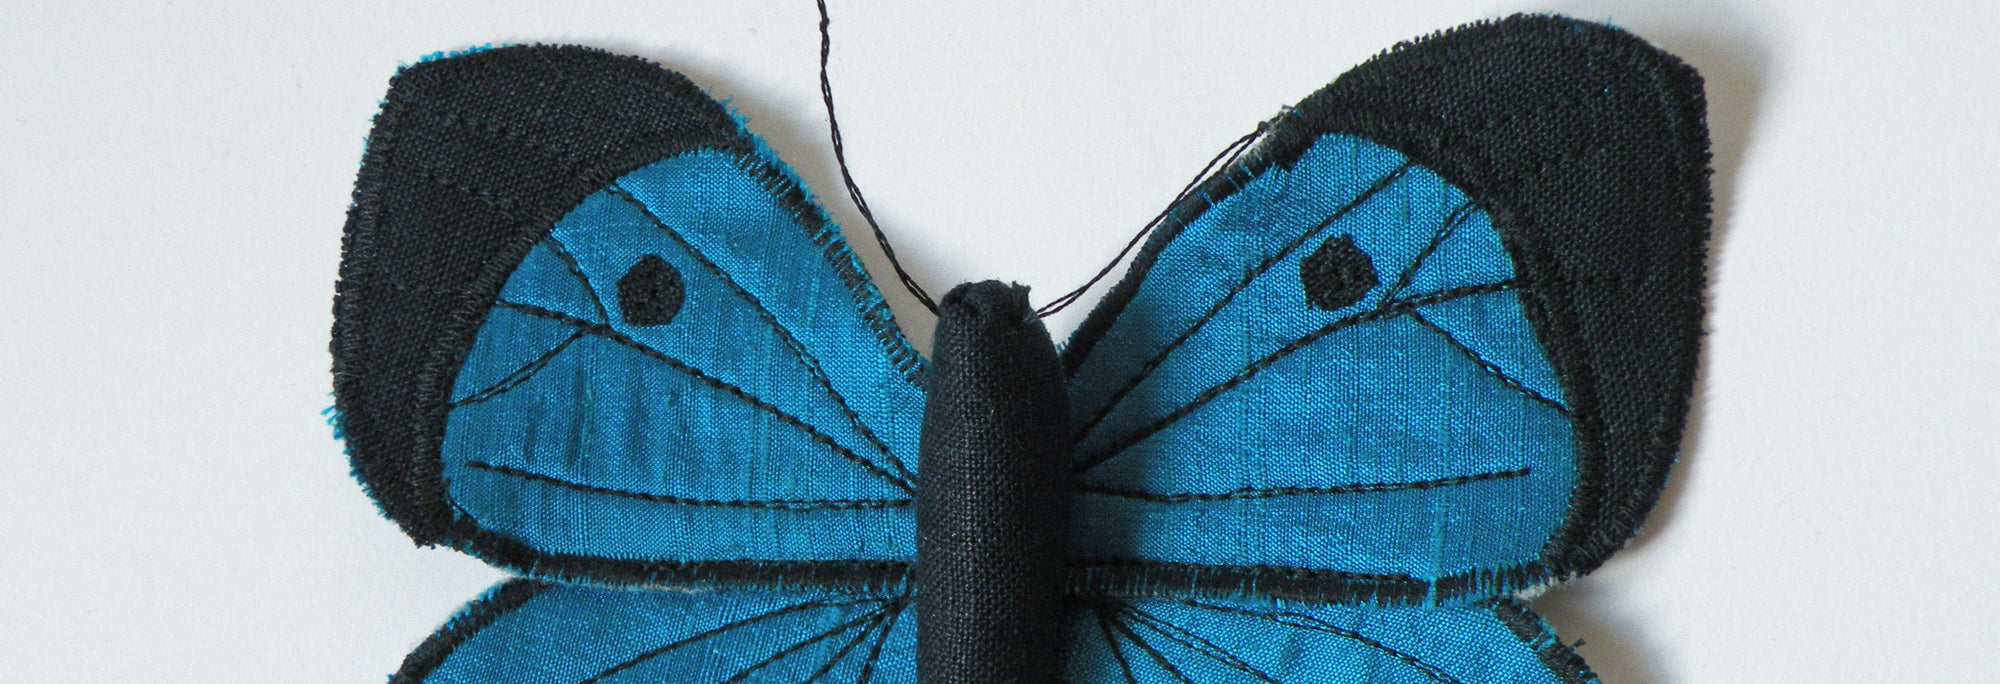 Stop-motion Video – Fabric Butterfly Metamorphosis